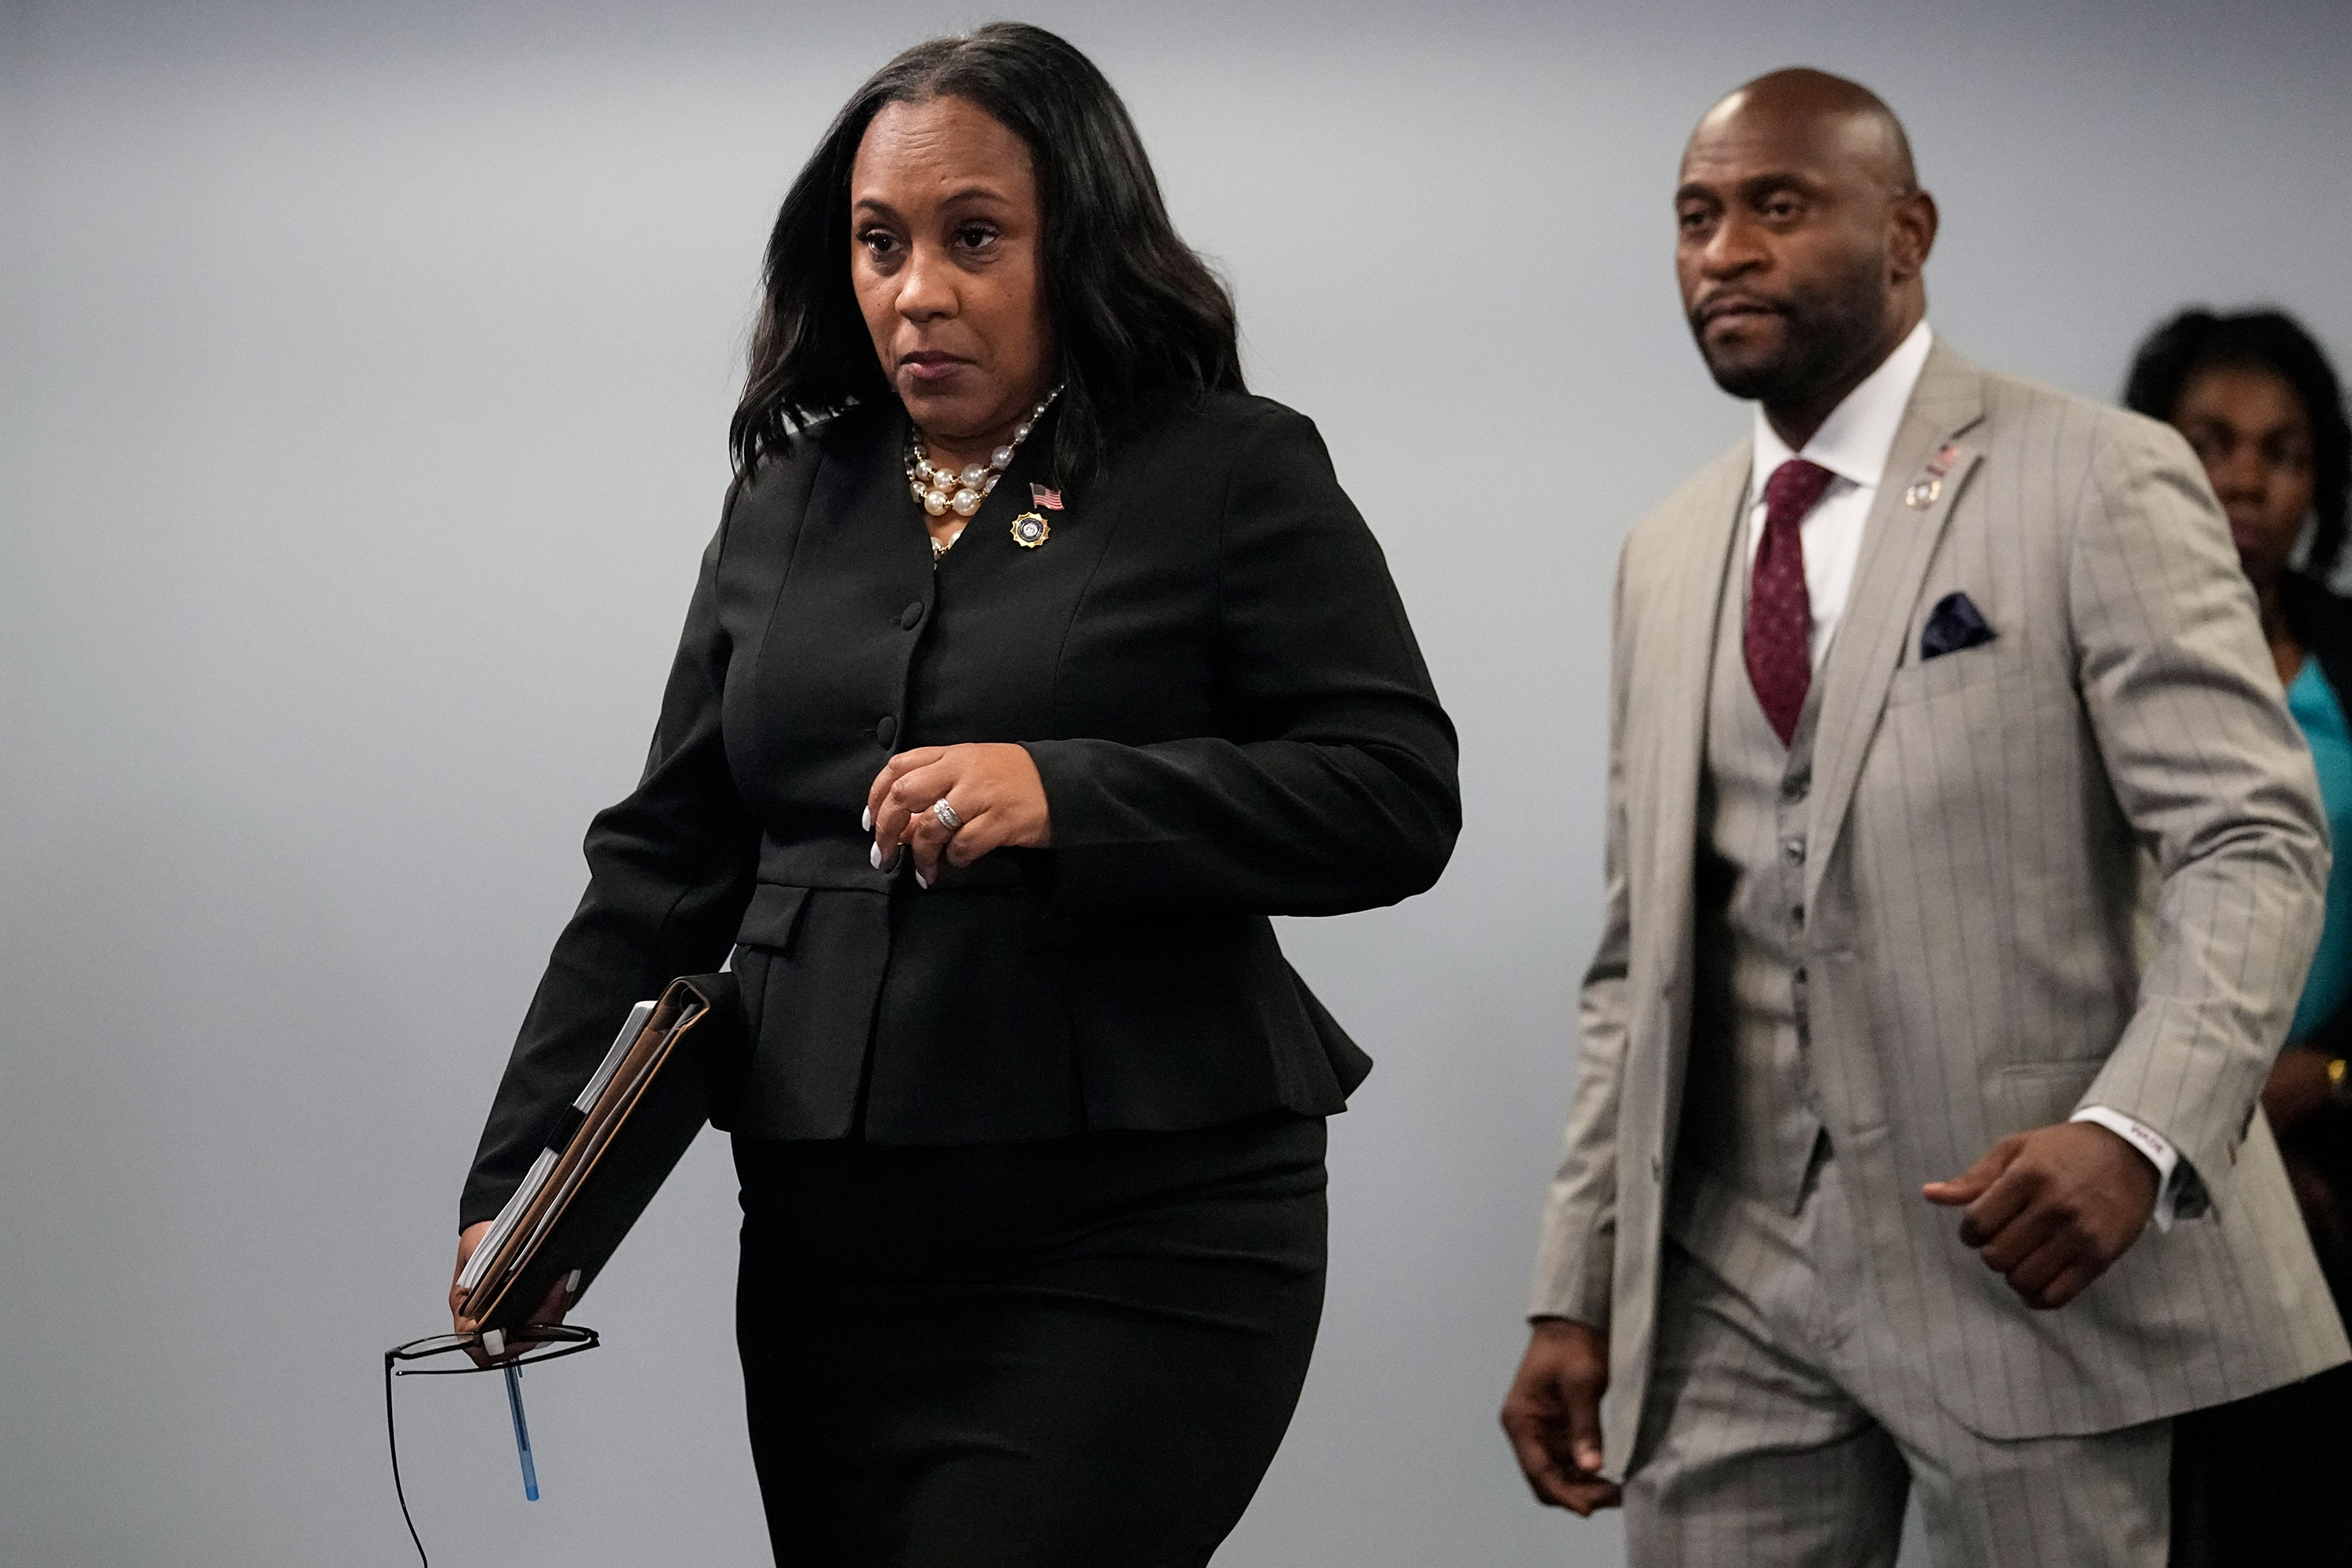 Fulton County District Attorney Fani Willis arrives for a press conference at the Fulton County Government Center in Atlanta on Monday.